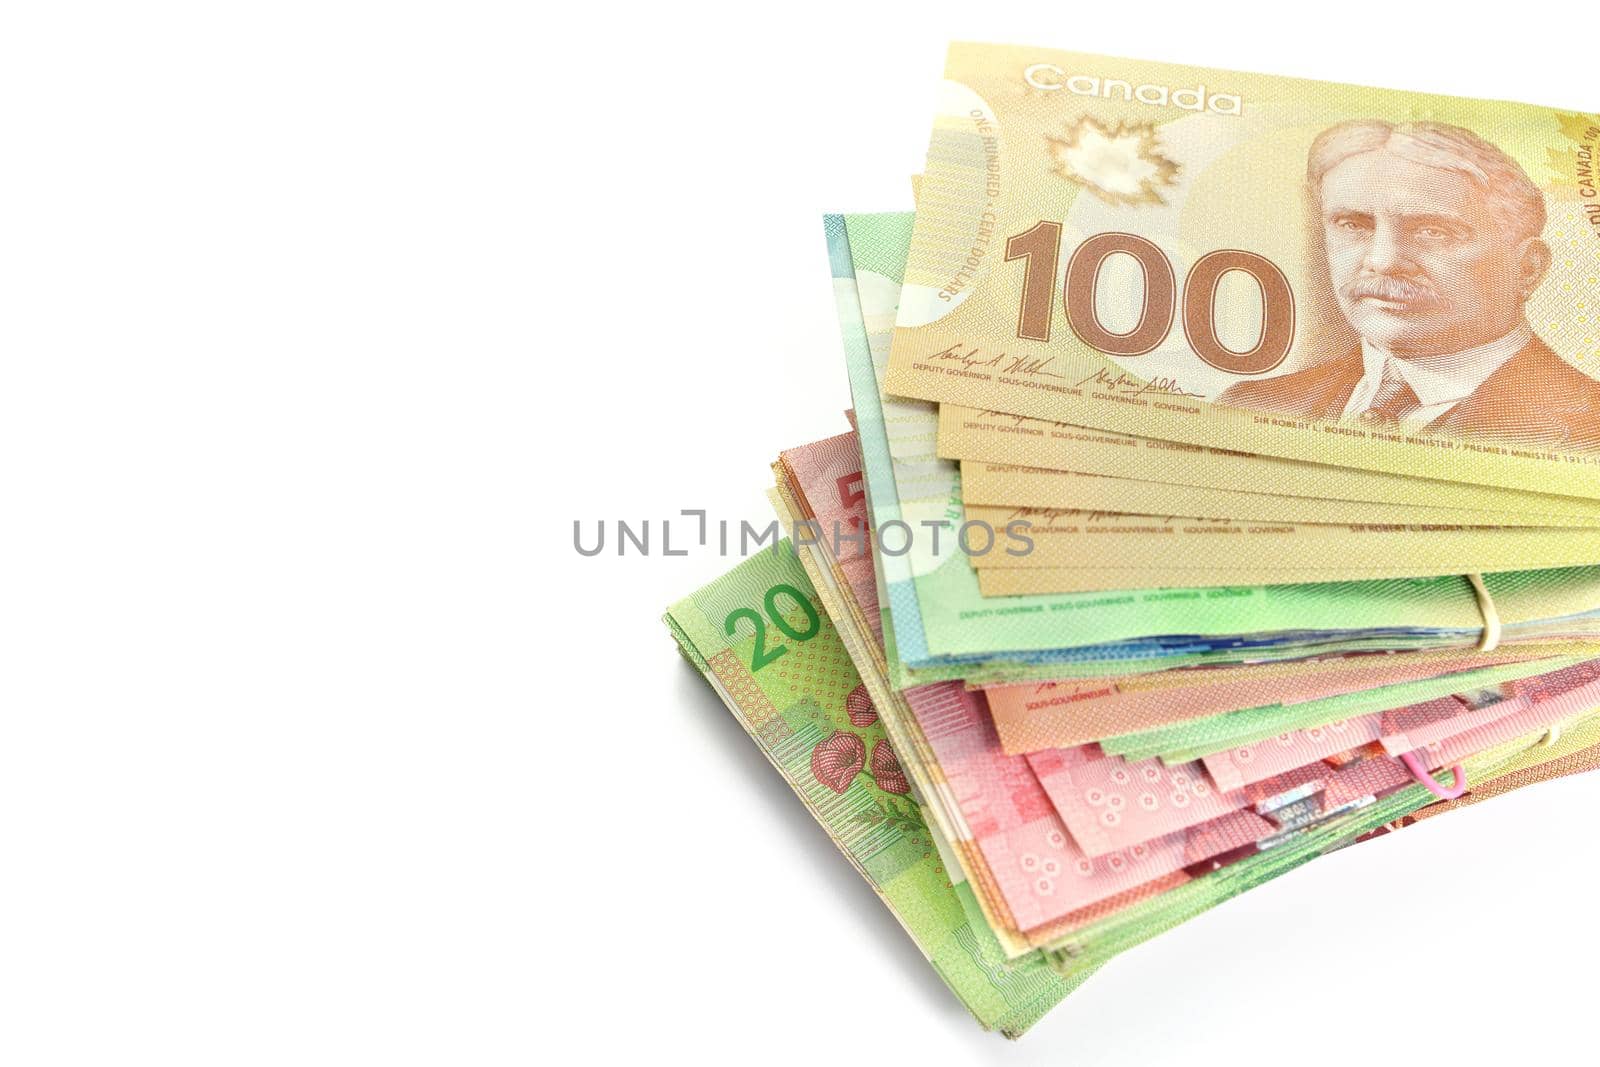 High Angle View of Large Stack of Canadian Banknotes on a White Background. Stack is slightly fanned. Top bill is 100 one hundred and the bills below have values of 5 five, 10 ten, 20 twenty, and 50 fifty dollars. Copy Space on Left. High quality photo